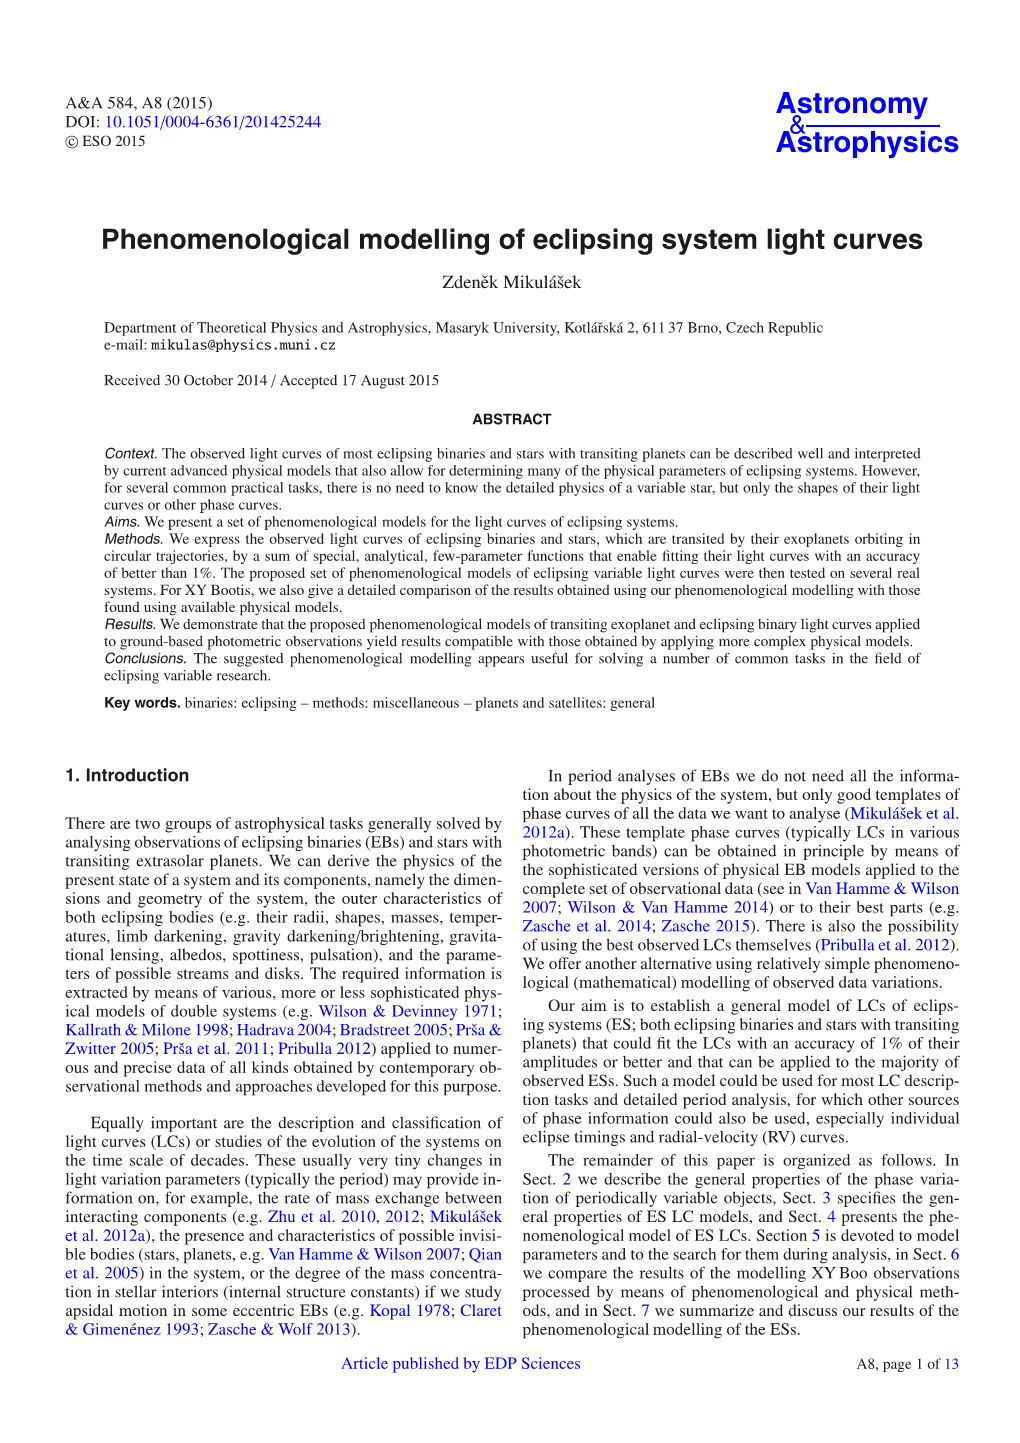 Phenomenological Modelling of Eclipsing System Light Curves